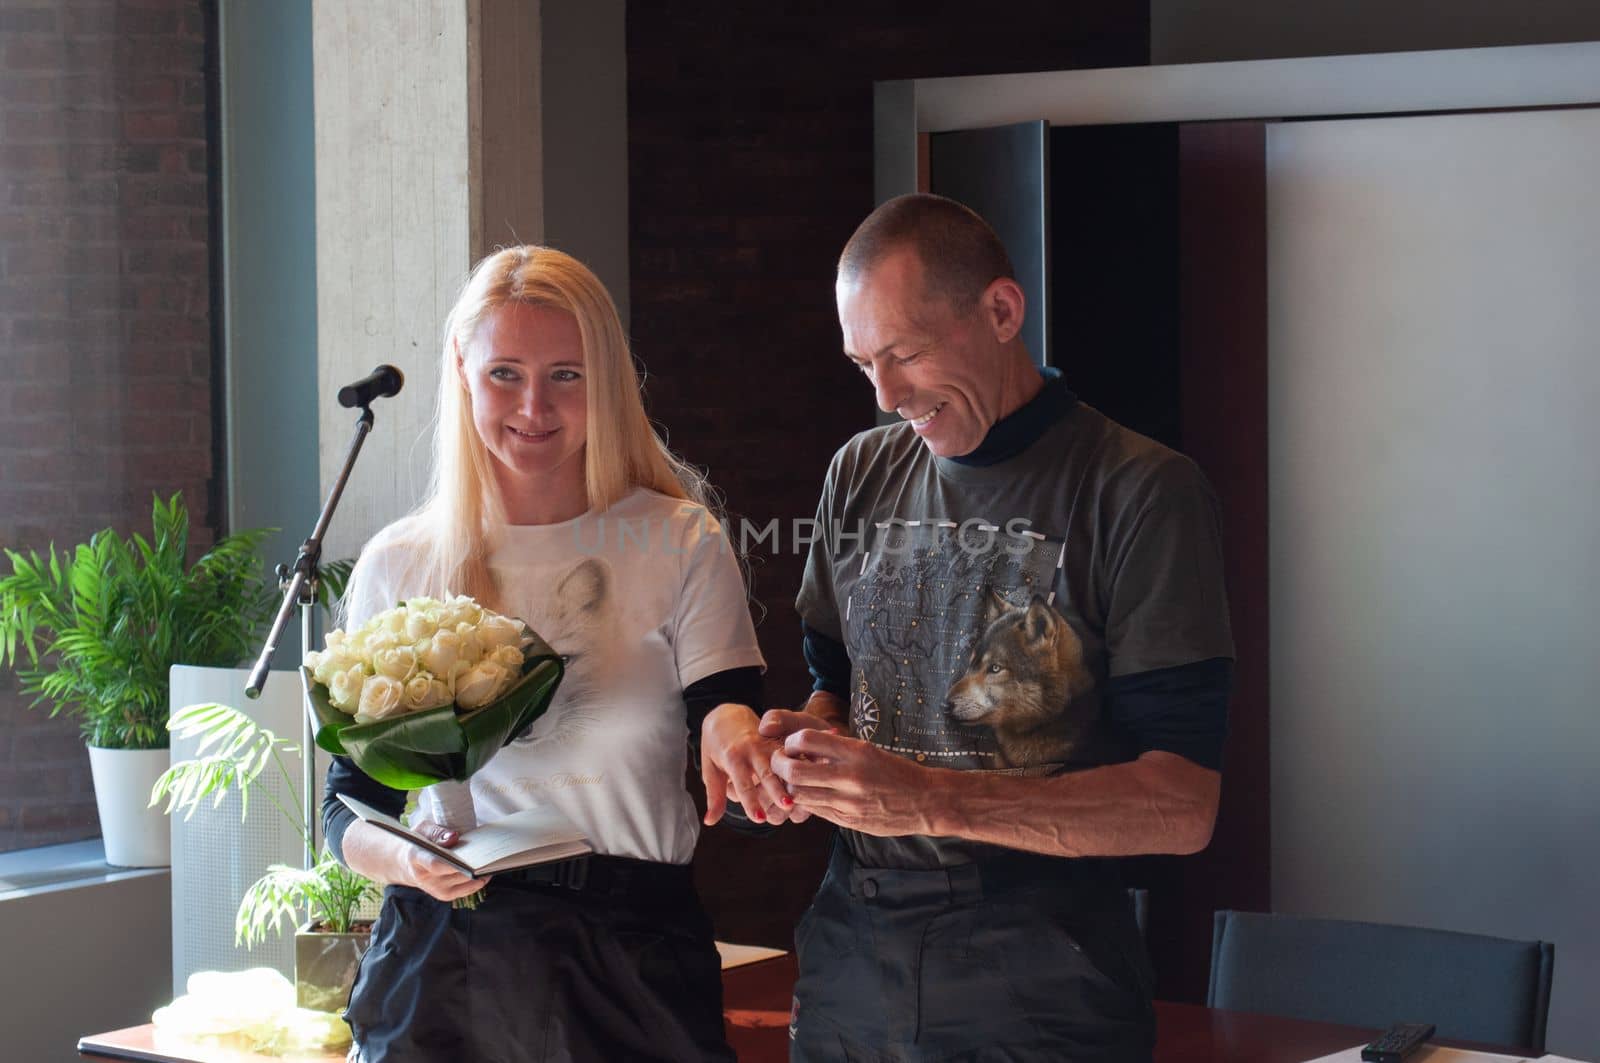 couple of motorbikers marry wedding in municipality, groom wears a ring to the bride, High quality photo